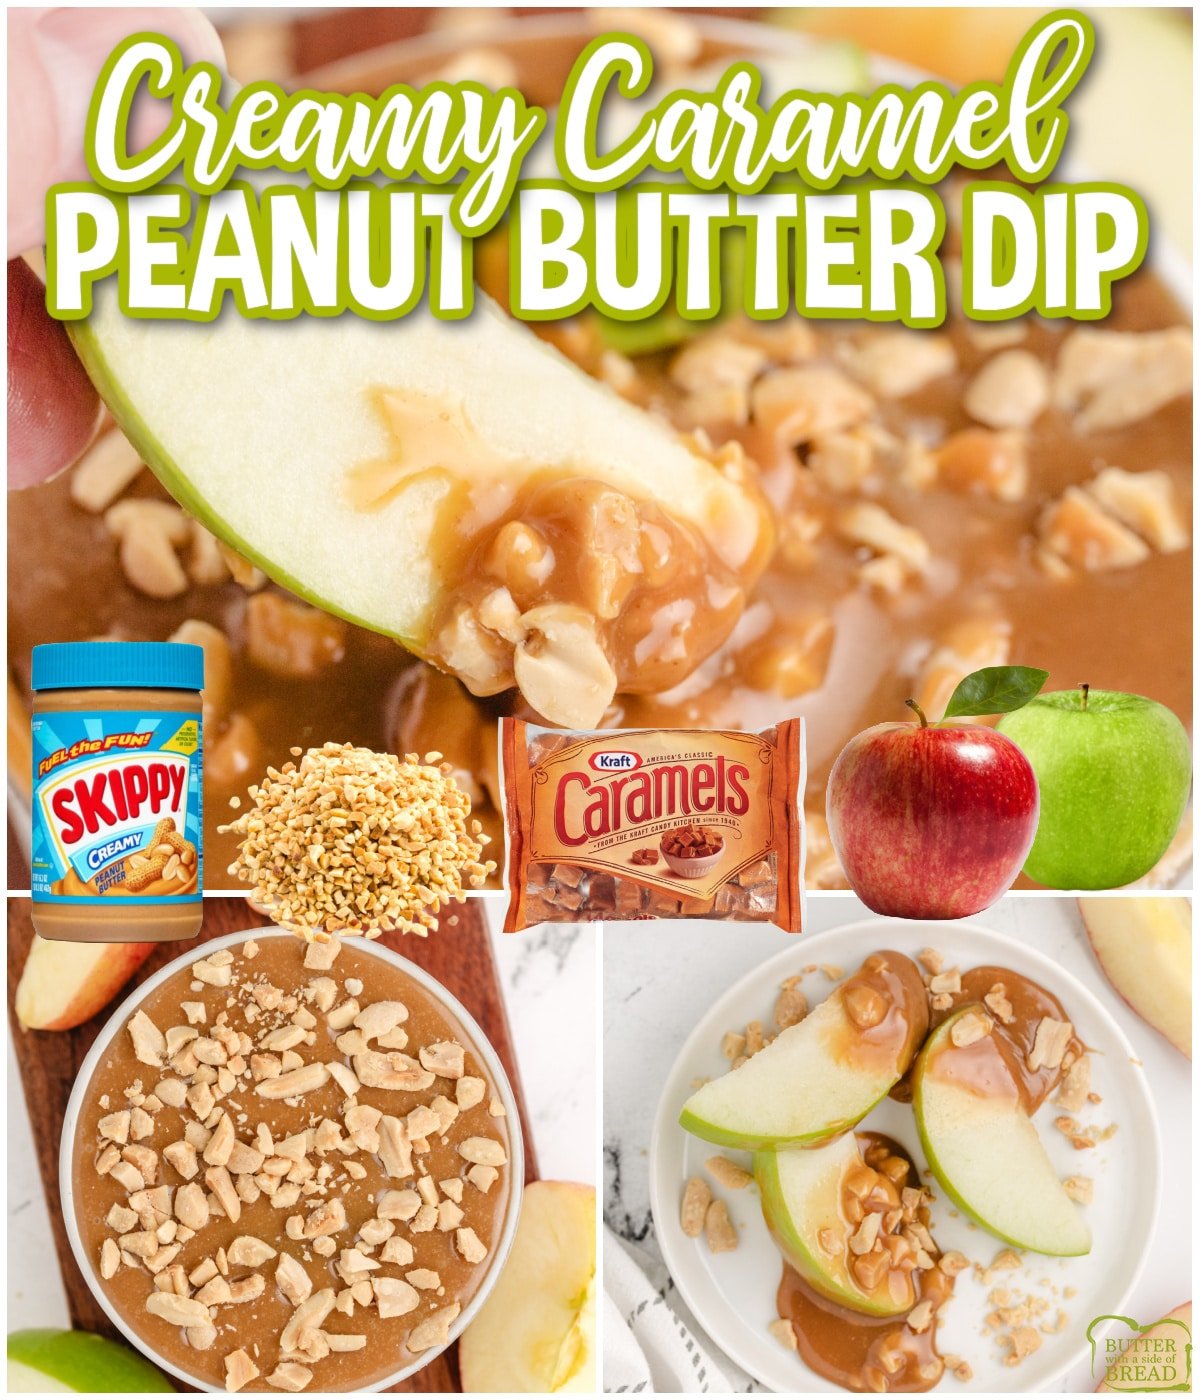 Caramel Peanut Butter Dip is made with 4 simple ingredients and is perfect for dipping apples. Made with melted caramels, milk, peanut butter, and chopped peanuts in less than 5 minutes!